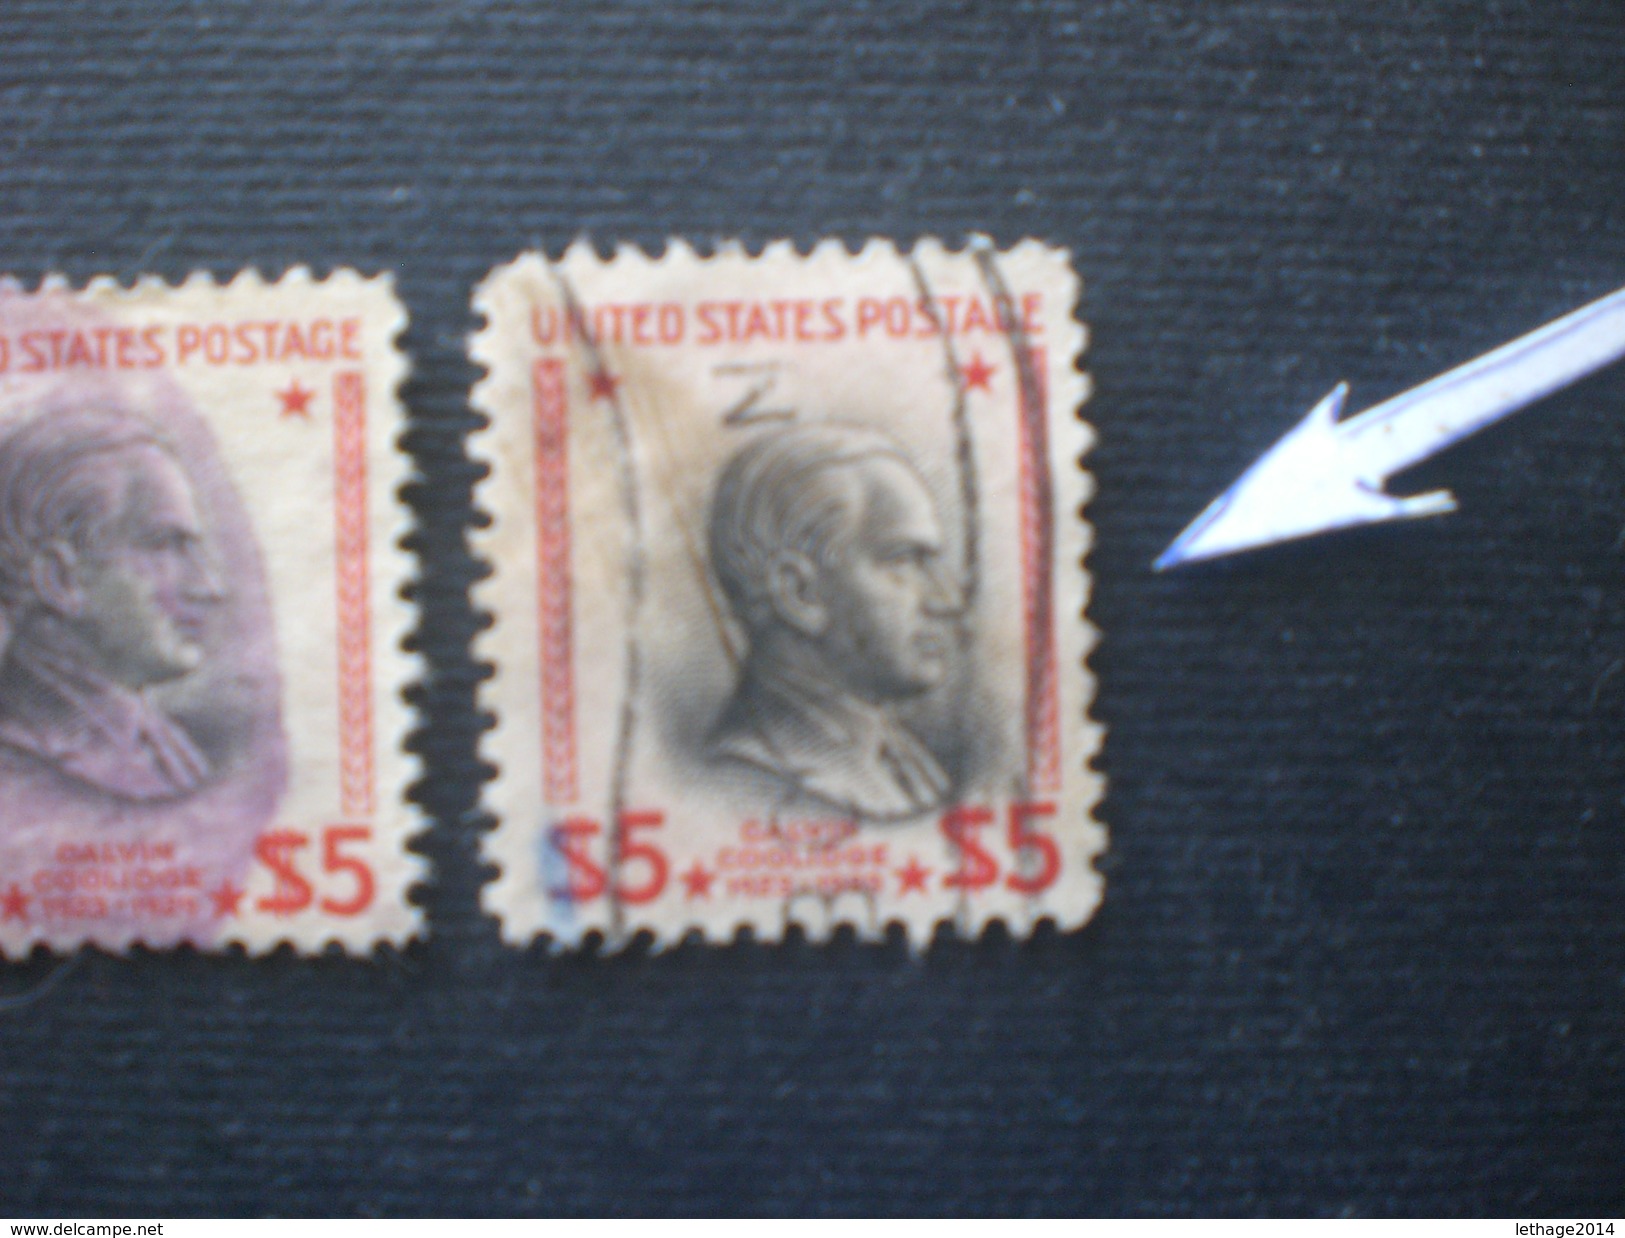 UNITED STATE EE.UU ÉTATS-UNIS US USA 1938 PRESIDENT $ 5 ERROR  SPOSTED CENTER - Used Stamps